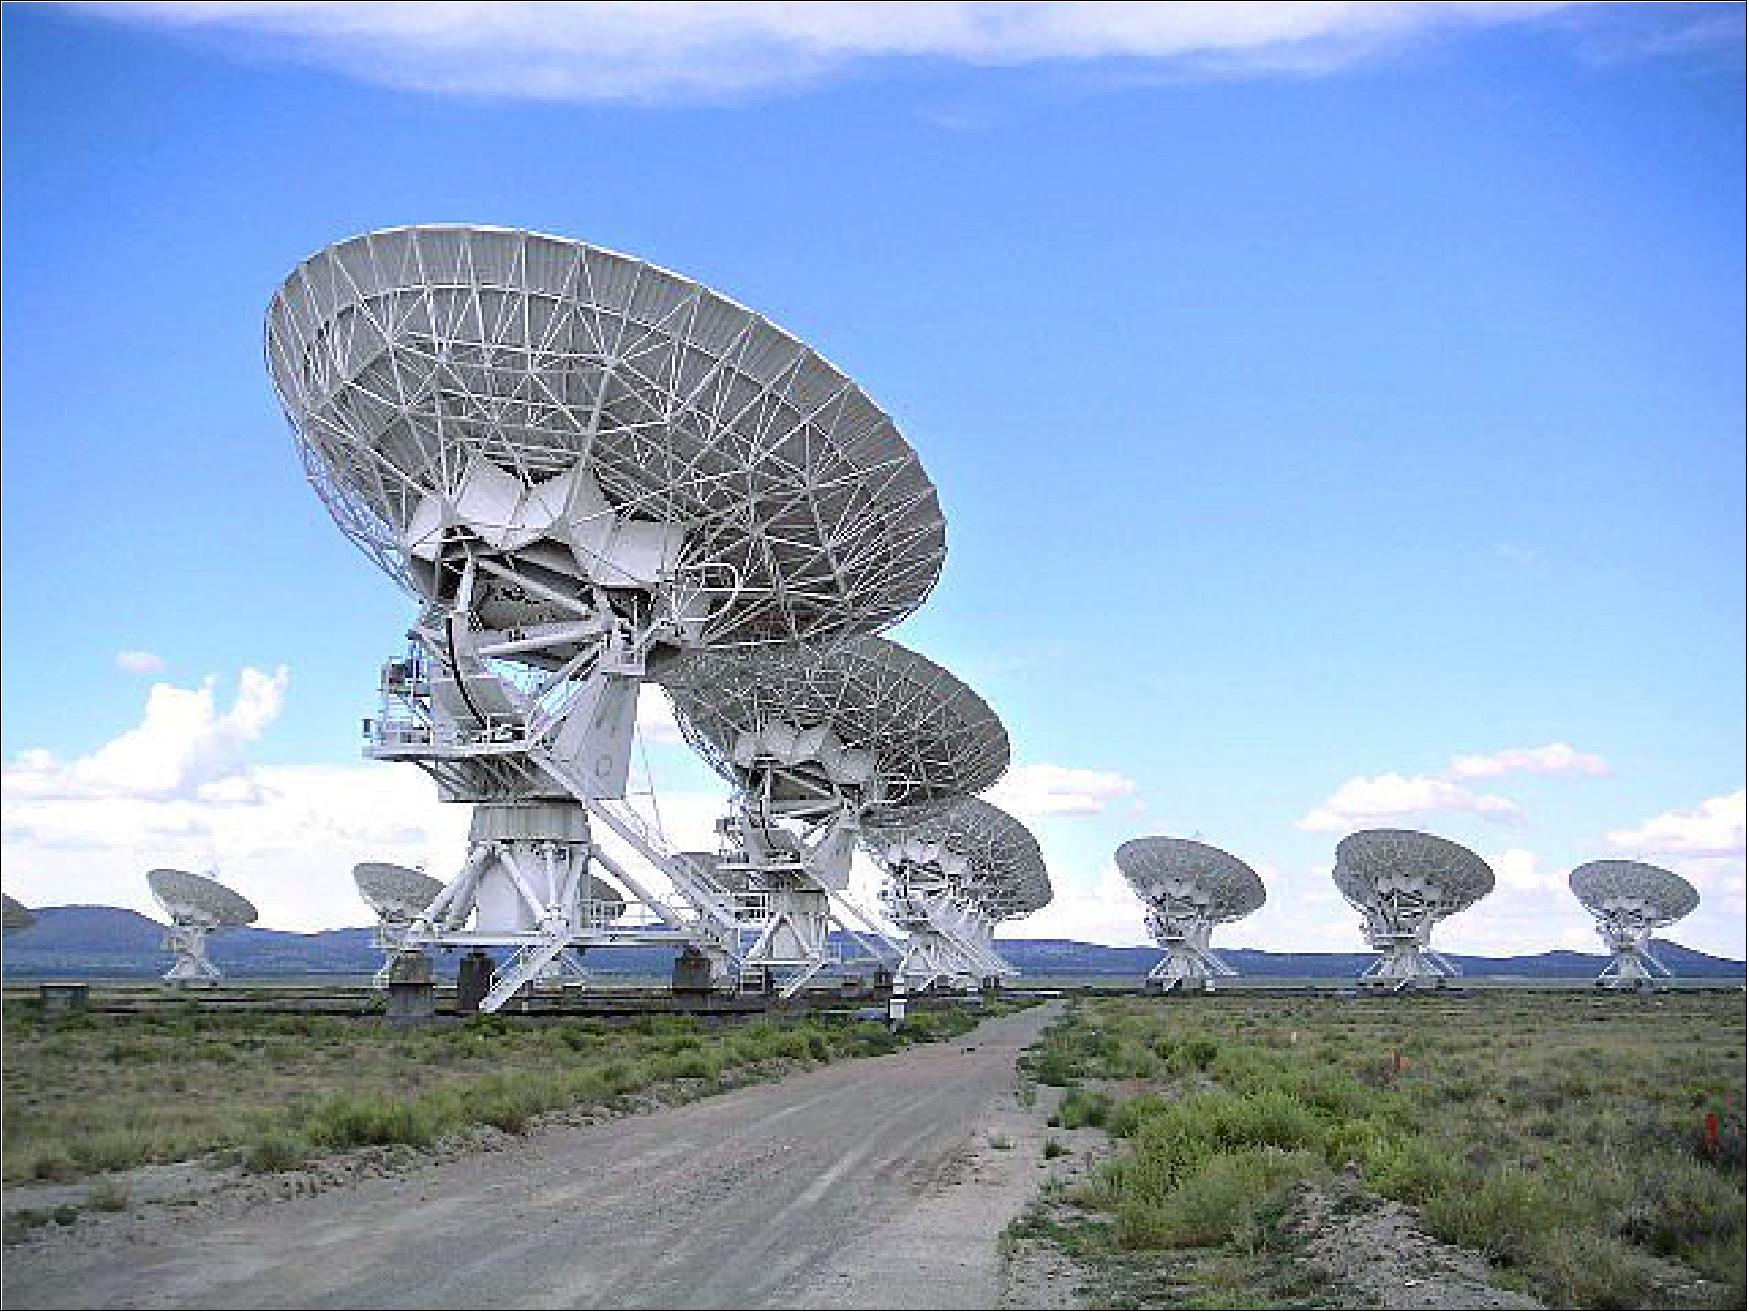 Figure 3: The Very Large Array near Socorro, New Mexico, USA. The radio telescope comprises 27 independent antennas, each of which has a dish diameter of 25 meters with a mass of 209 metric tons (image credit: NRAO)